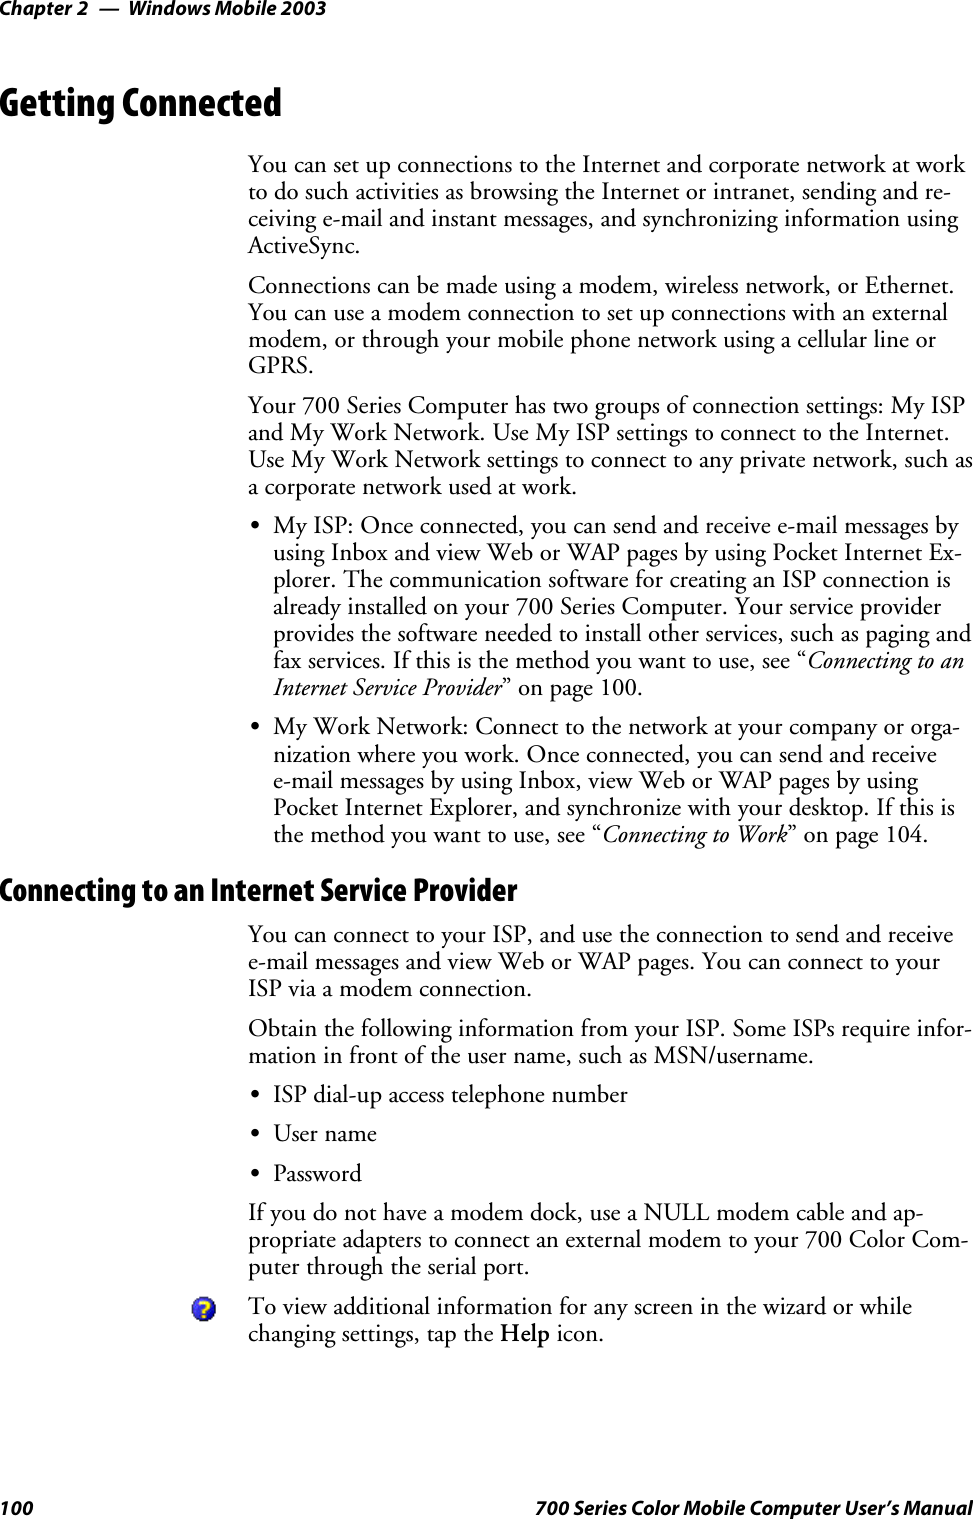 Windows Mobile 2003Chapter —2100 700 Series Color Mobile Computer User’s ManualGetting ConnectedYou can set up connections to the Internet and corporate network at workto do such activities as browsing the Internet or intranet, sending and re-ceiving e-mail and instant messages, and synchronizing information usingActiveSync.Connections can be made using a modem, wireless network, or Ethernet.You can use a modem connection to set up connections with an externalmodem, or through your mobile phone network using a cellular line orGPRS.Your 700 Series Computer has two groups of connection settings: My ISPand My Work Network. Use My ISP settings to connect to the Internet.Use My Work Network settings to connect to any private network, such asa corporate network used at work.SMy ISP: Once connected, you can send and receive e-mail messages byusing Inbox and view Web or WAP pages by using Pocket Internet Ex-plorer. The communication software for creating an ISP connection isalready installed on your 700 Series Computer. Your service providerprovides the software needed to install other services, such as paging andfax services. If this is the method you want to use, see “Connecting to anInternet Service Provider” on page 100.SMy Work Network: Connect to the network at your company or orga-nization where you work. Once connected, you can send and receivee-mail messages by using Inbox, view Web or WAP pages by usingPocket Internet Explorer, and synchronize with your desktop. If this isthe method you want to use, see “Connecting to Work” on page 104.Connecting to an Internet Service ProviderYou can connect to your ISP, and use the connection to send and receivee-mail messages and view Web or WAP pages. You can connect to yourISP via a modem connection.Obtain the following information from your ISP. Some ISPs require infor-mation in front of the user name, such as MSN/username.SISP dial-up access telephone numberSUser nameSPasswordIf you do not have a modem dock, use a NULL modem cable and ap-propriate adapters to connect an external modem to your 700 Color Com-puter through the serial port.To view additional information for any screen in the wizard or whilechanging settings, tap the Help icon.